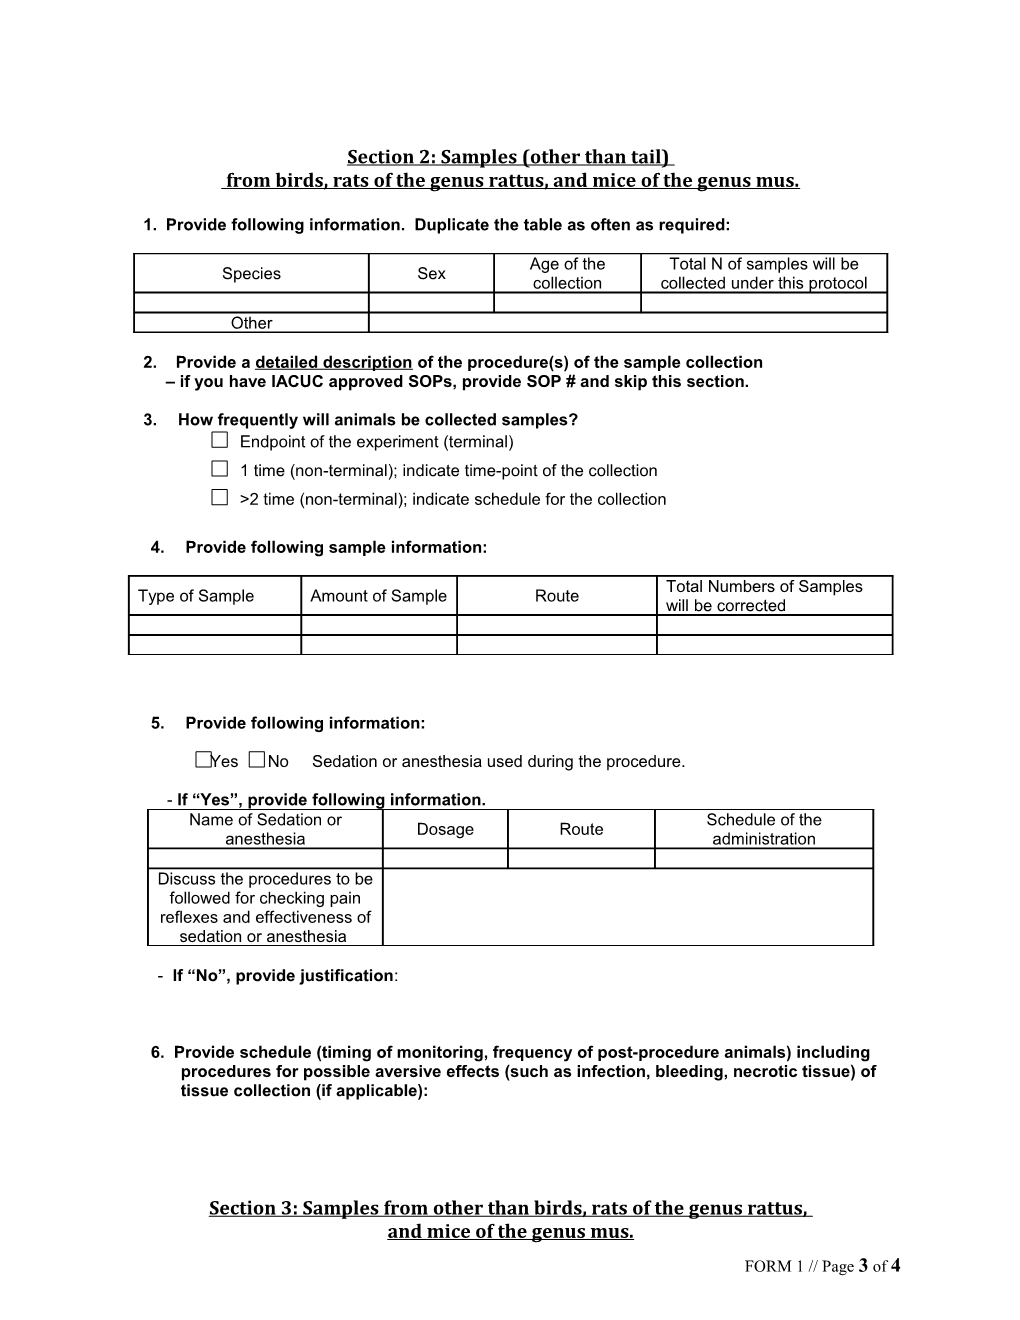 Form 1 Contains Following Sections; Please Complete All Applicable Section(S)